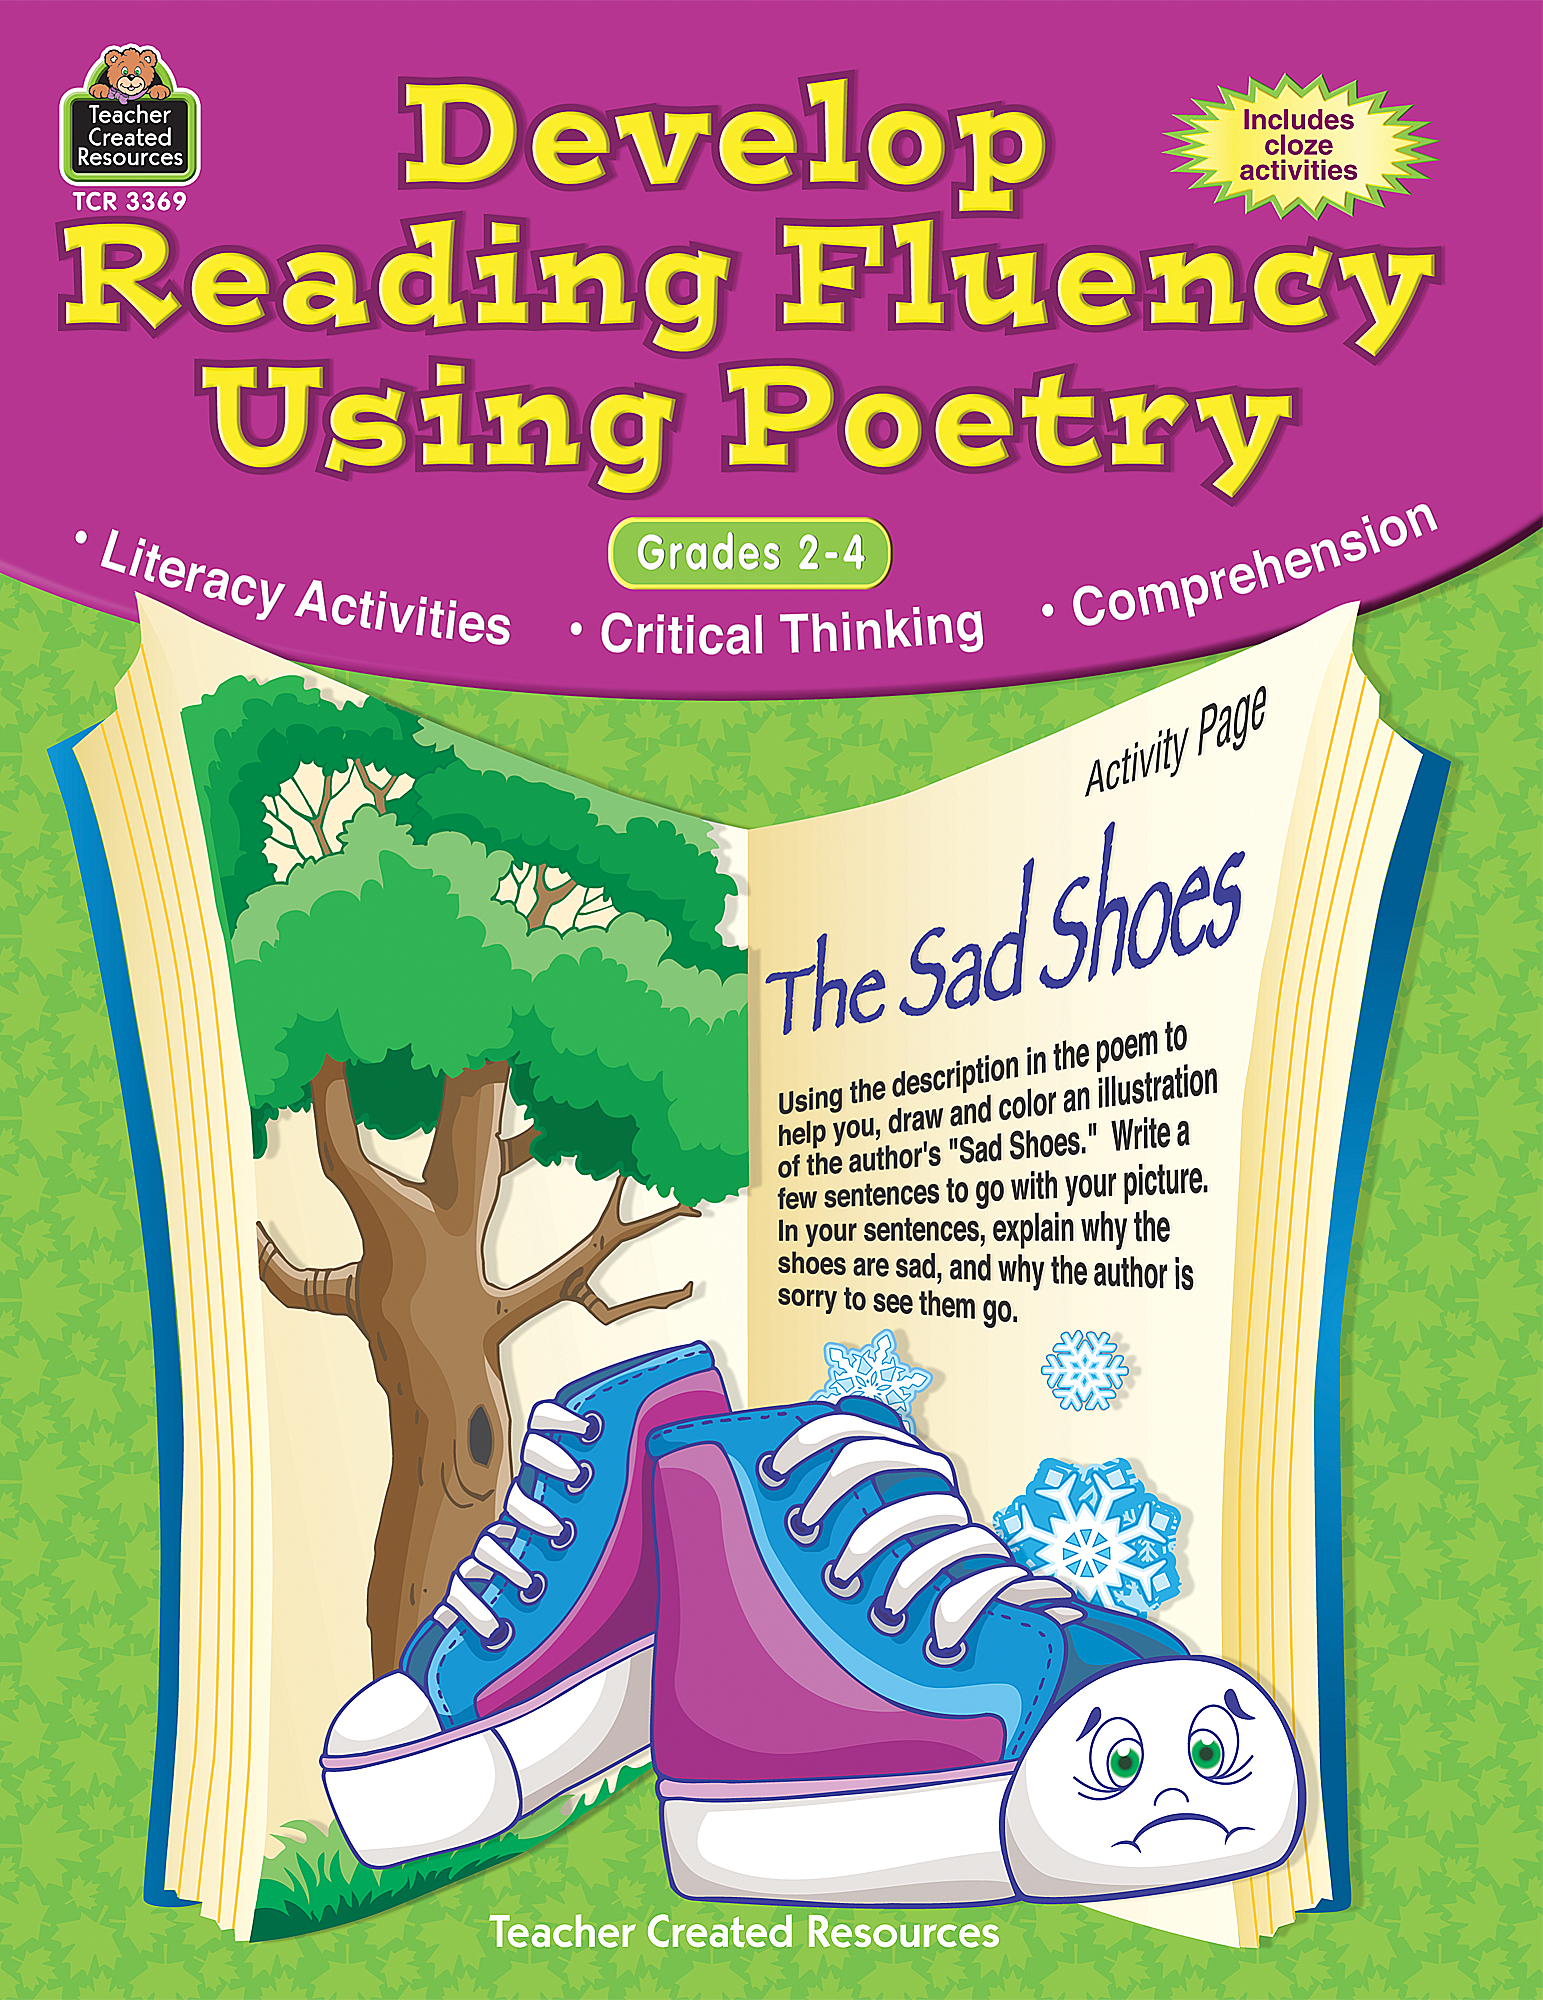 develop-reading-fluency-using-poetry-tcr3369-teacher-created-resources